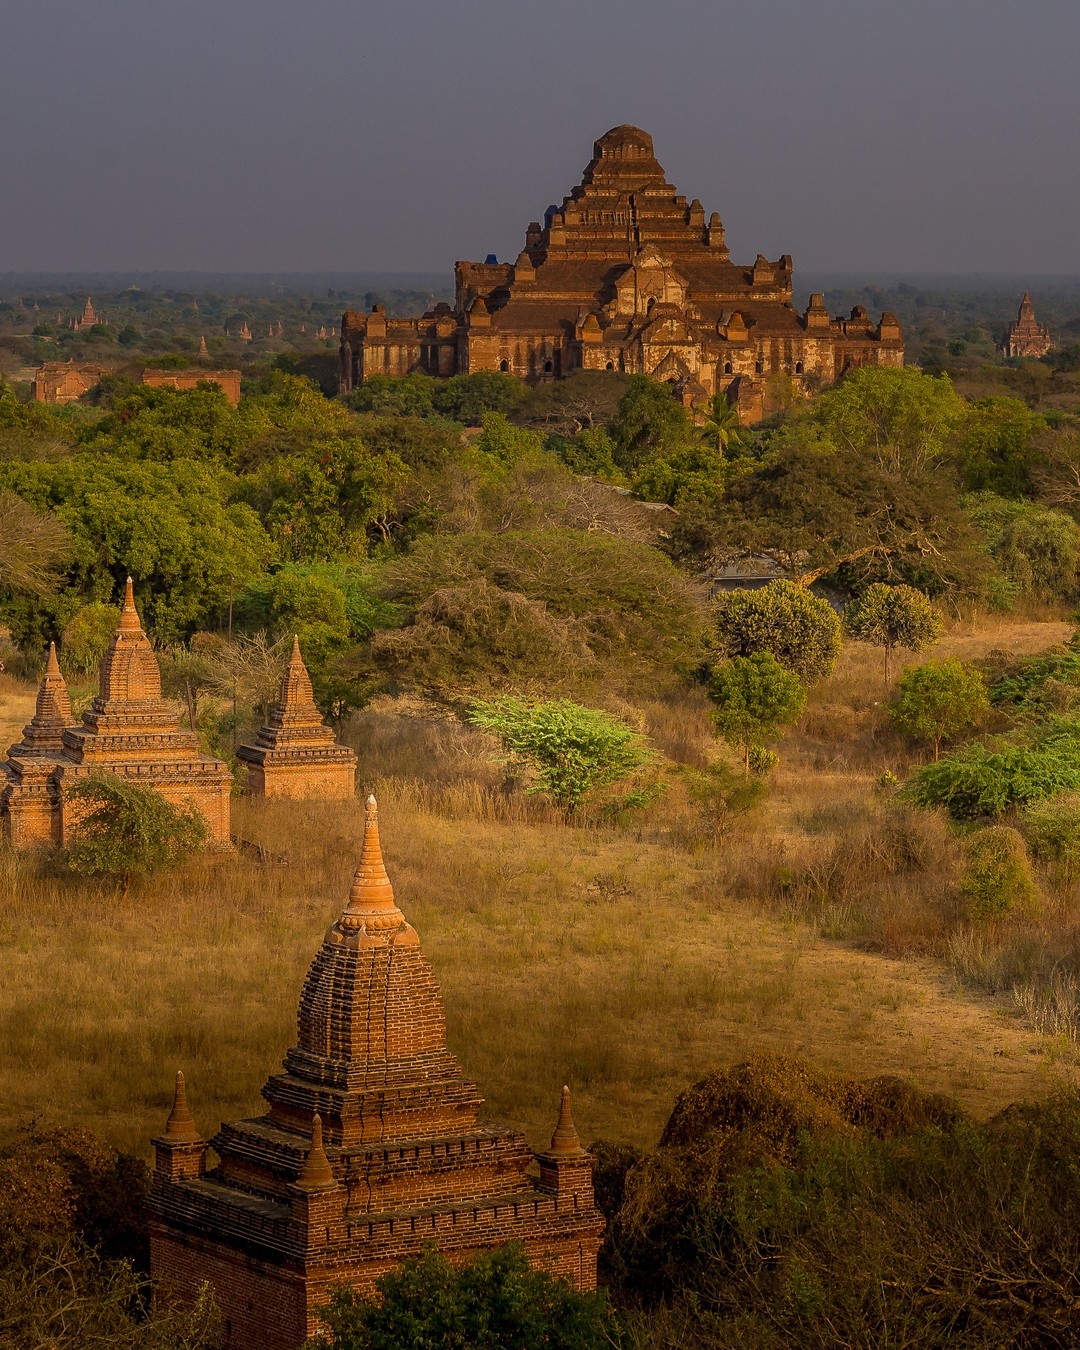 The temples of Bagan in #Myanmar – the world’s largest and densest concentration of Buddhist temples, pagodas, stupas and ruins. ⠀⠀
⠀⠀
Founded in the second century AD, the kingdom of Bagan once had over 10,000 Buddhist temples, pagodas and monasteries, all constructed between the 11th and 13th centuries. We visited during our cycling tour of Myanmar with @gadventures and @lonelyplanet.⠀⠀
⠀⠀
As it’s located in an active earthquake zone, Bagan has suffered many earthquakes over the ages, the most recent of which in 2016 destroyed over 400 buildings and damaged hundreds more. Today, the remains of ‘only’ 2,000 temples and pagodas can still be seen, many of which are undergoing repairs and restoration.⠀⠀
-⠀⠀
-⠀⠀
-⠀⠀
-⠀⠀
-⠀⠀
-⠀⠀
-⠀⠀
#gadventures #Bagan #Burma #Mandalay #mystic #temples #pagoda #stupa #travelgram #instatravel  #tranquility #Burmese #neverstopexploring #keepitwild #lpPathfinders #ic_adventures #global_hotshotz #lpPathfinders #worldtravelbook #exploretocreate #theoutbound